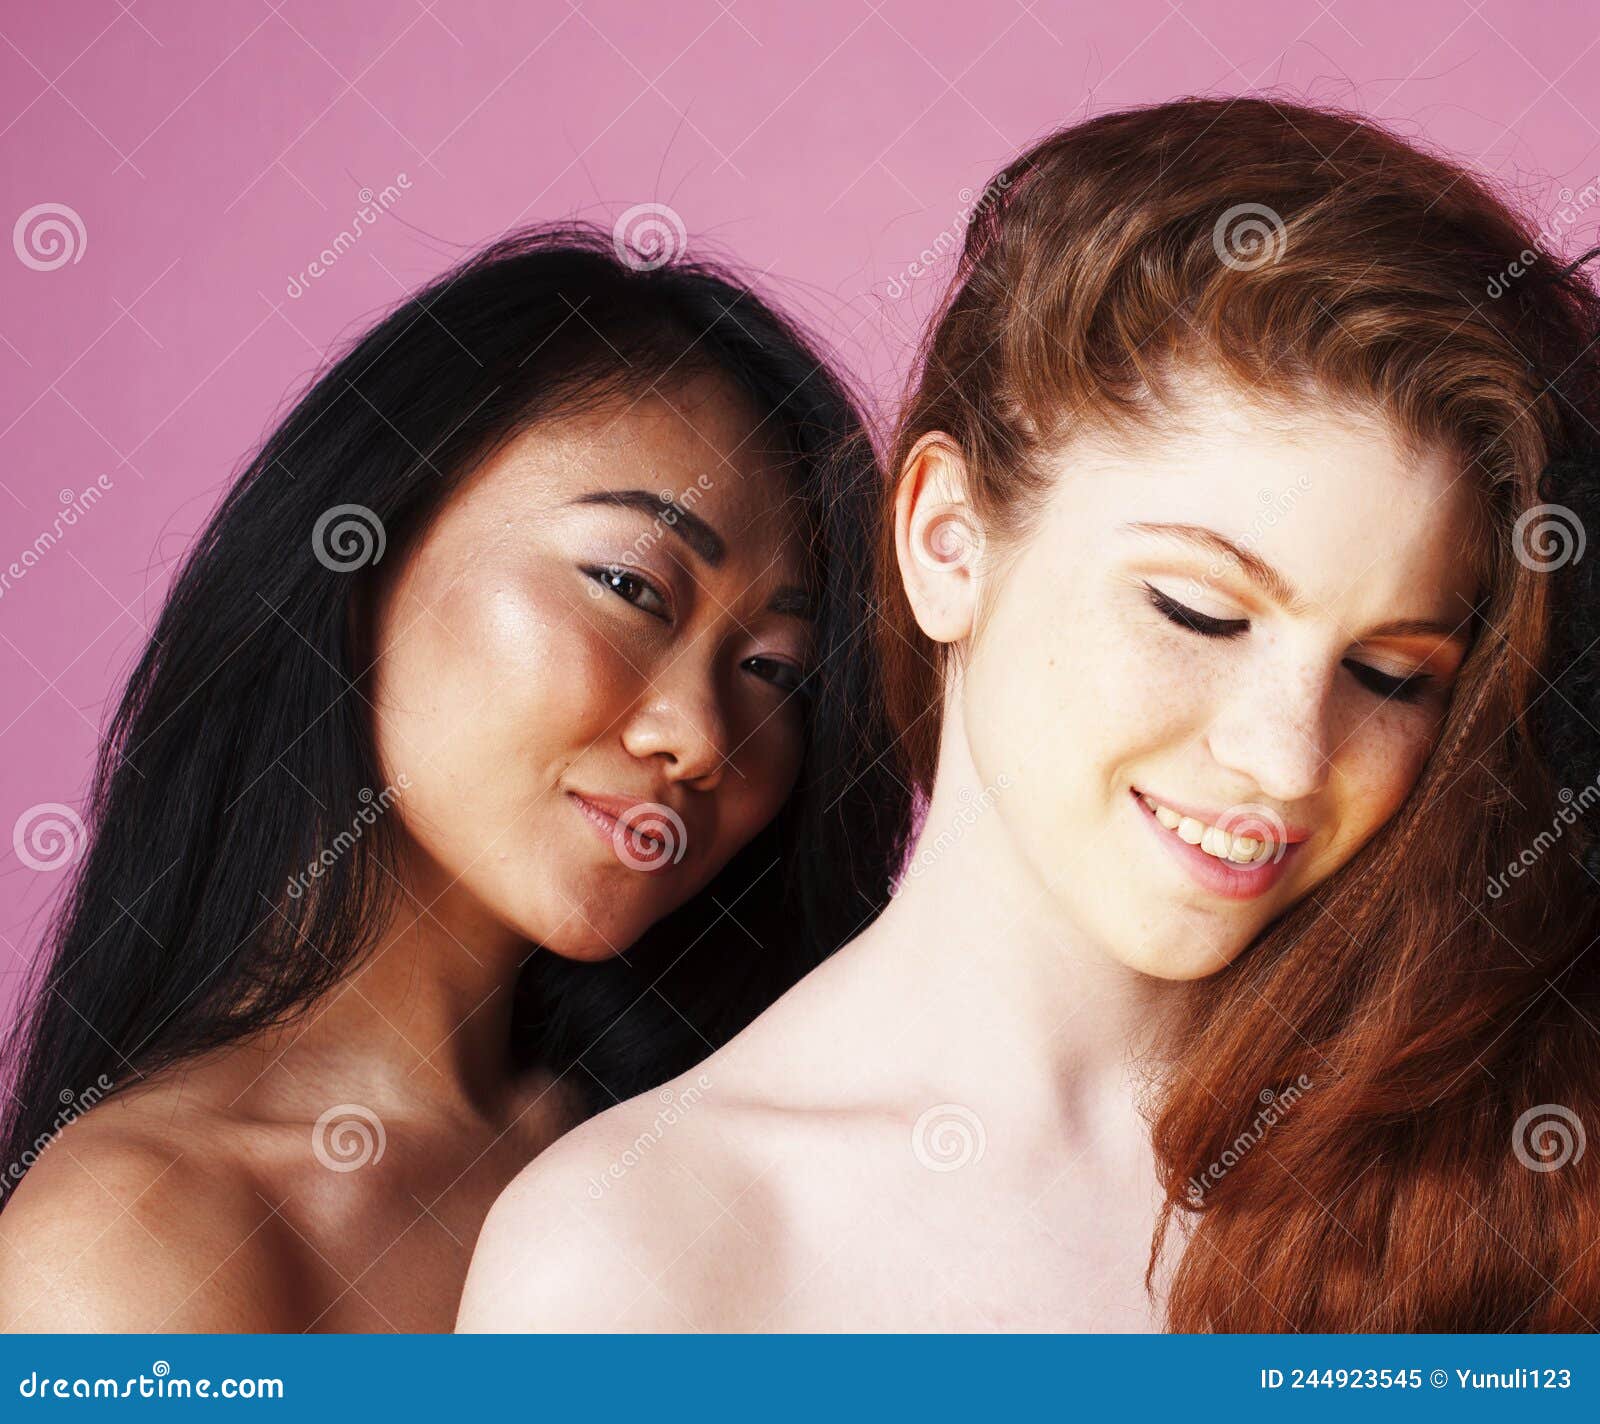 Different Nation Girls with Diversuty in Skin, Hair image pic